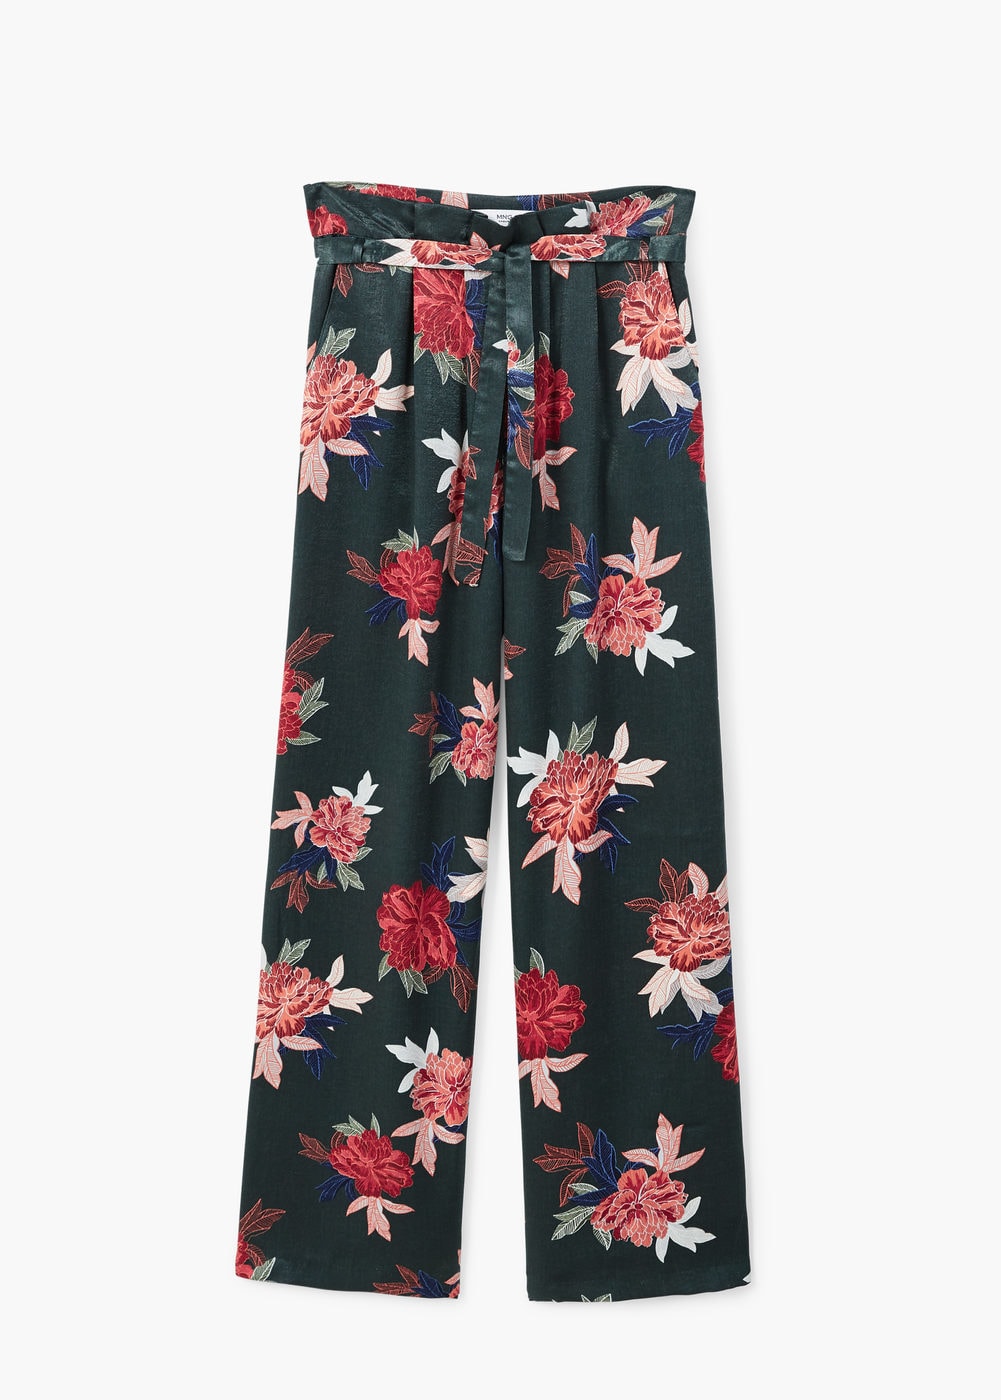 Floral Print Trousers £49.99 